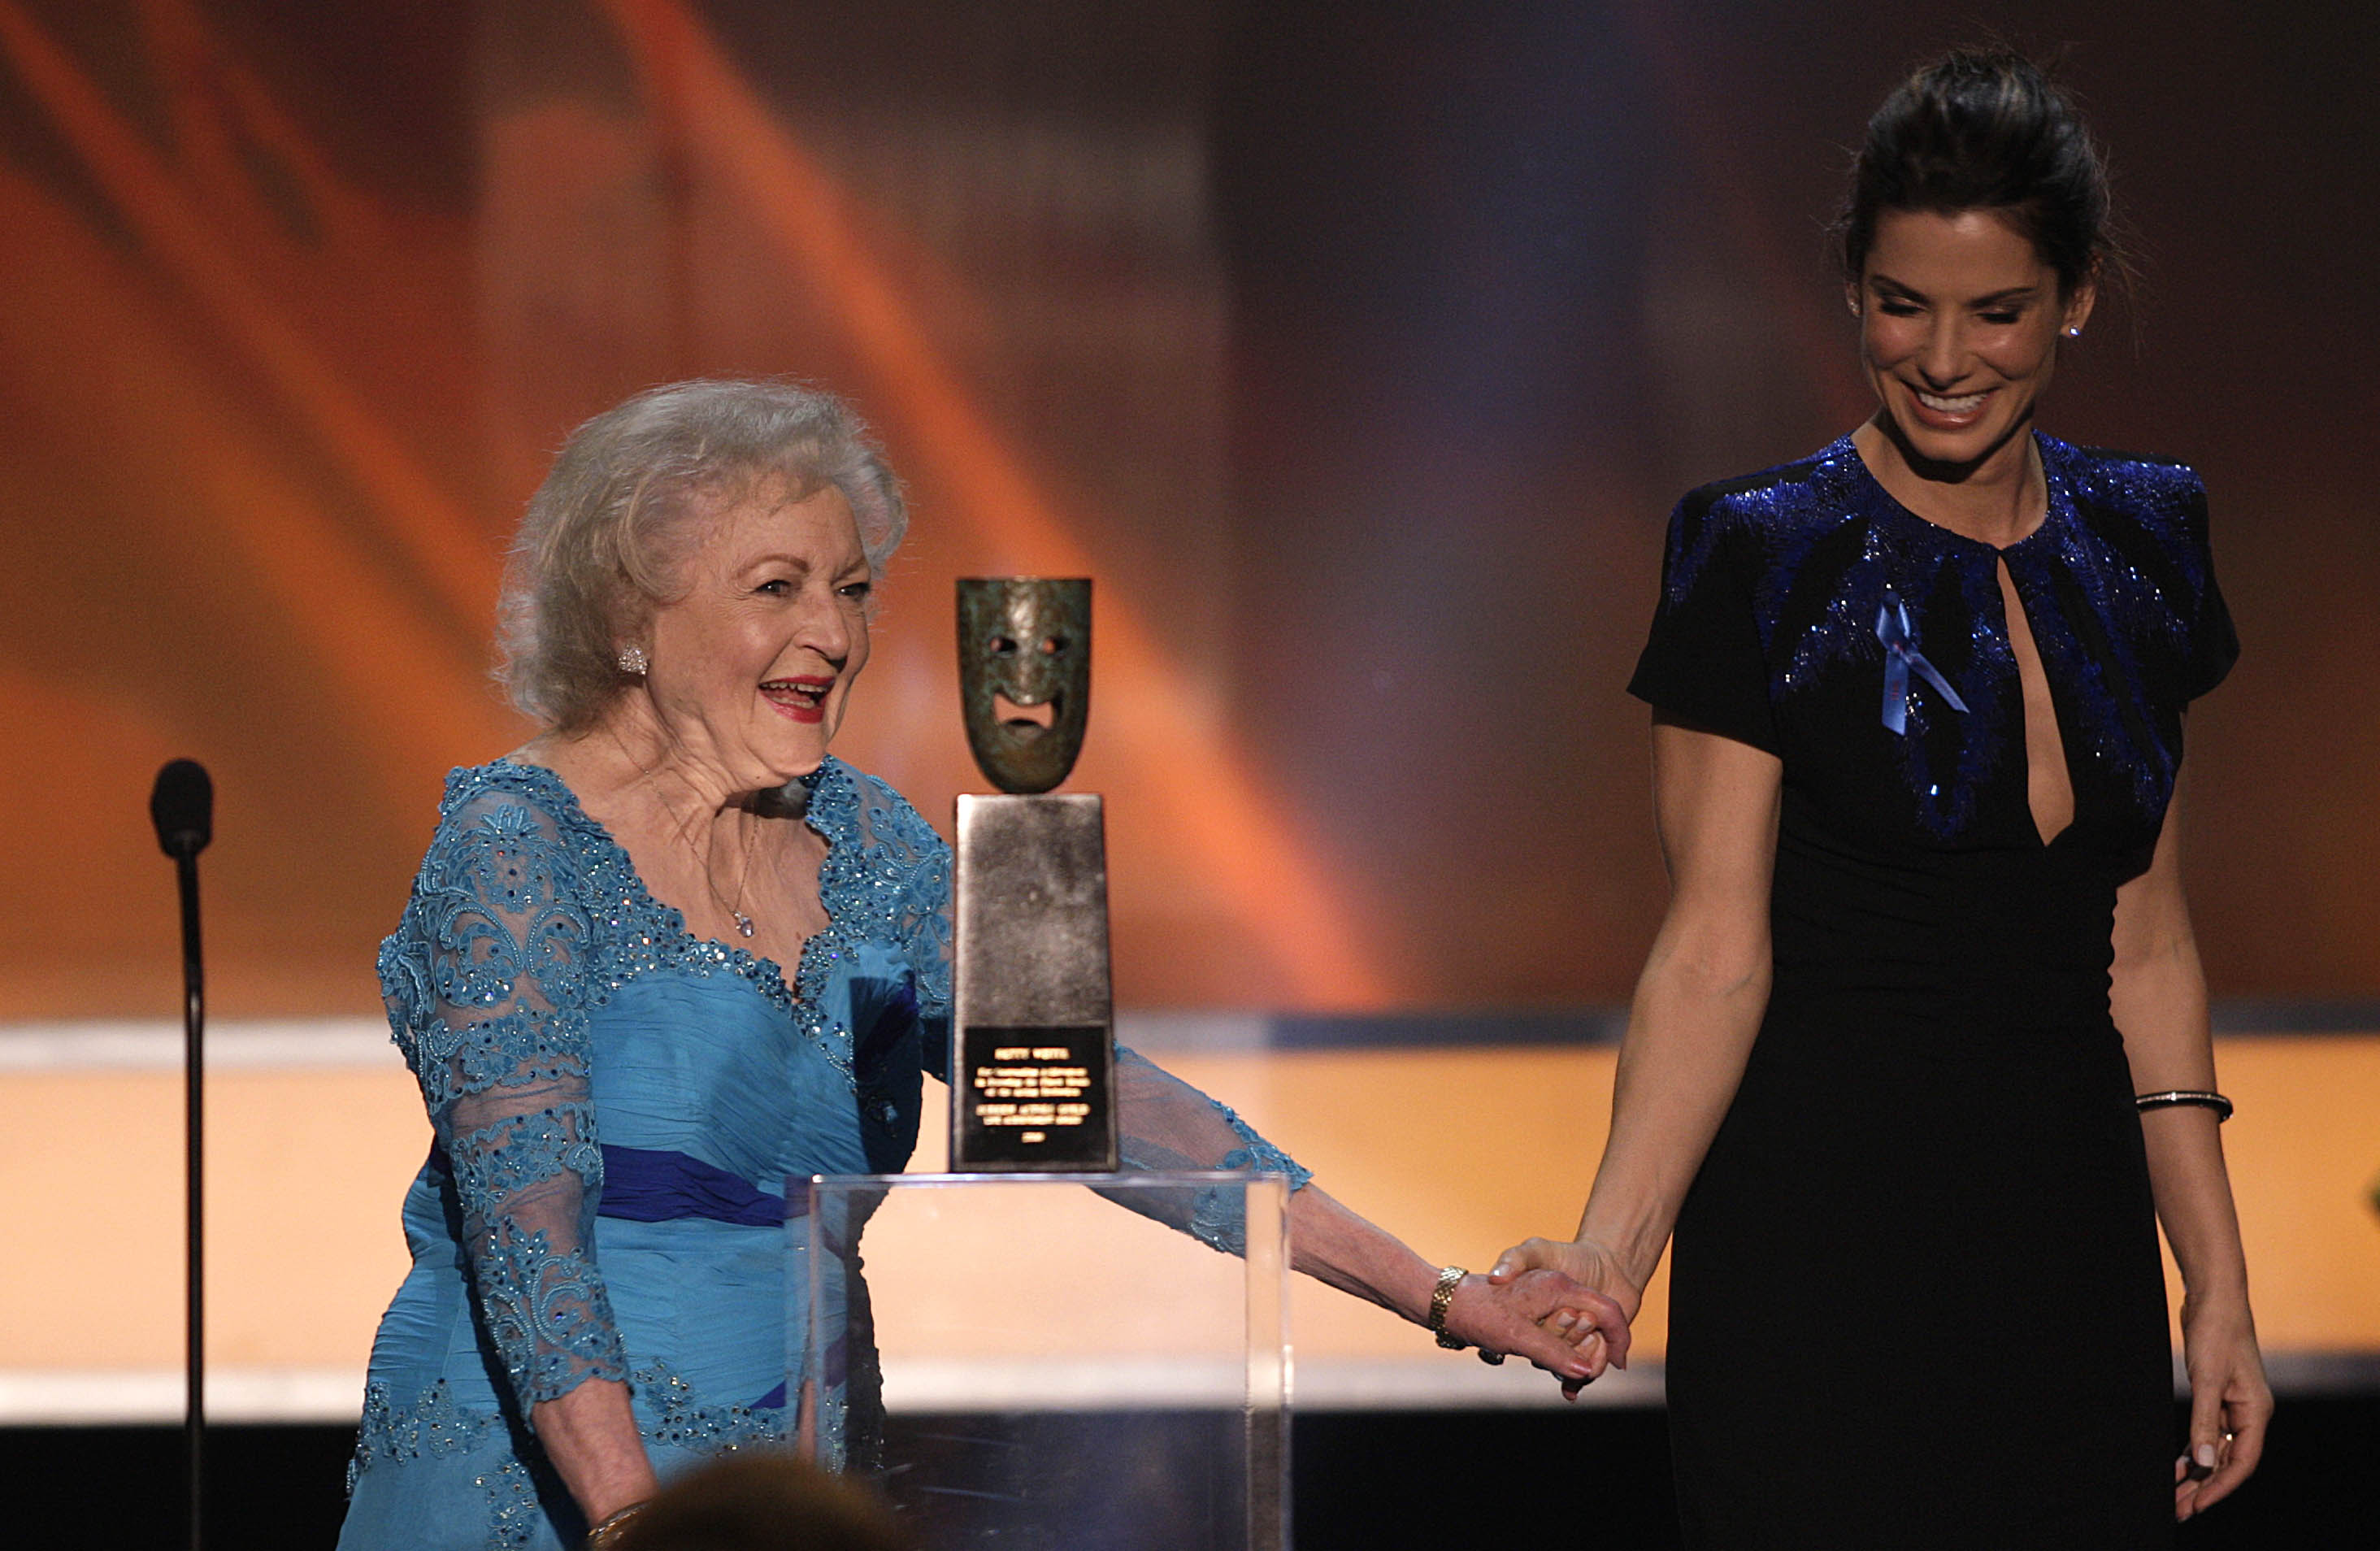 In 2010, Betty White received the SAG Lifetime Achievement Award